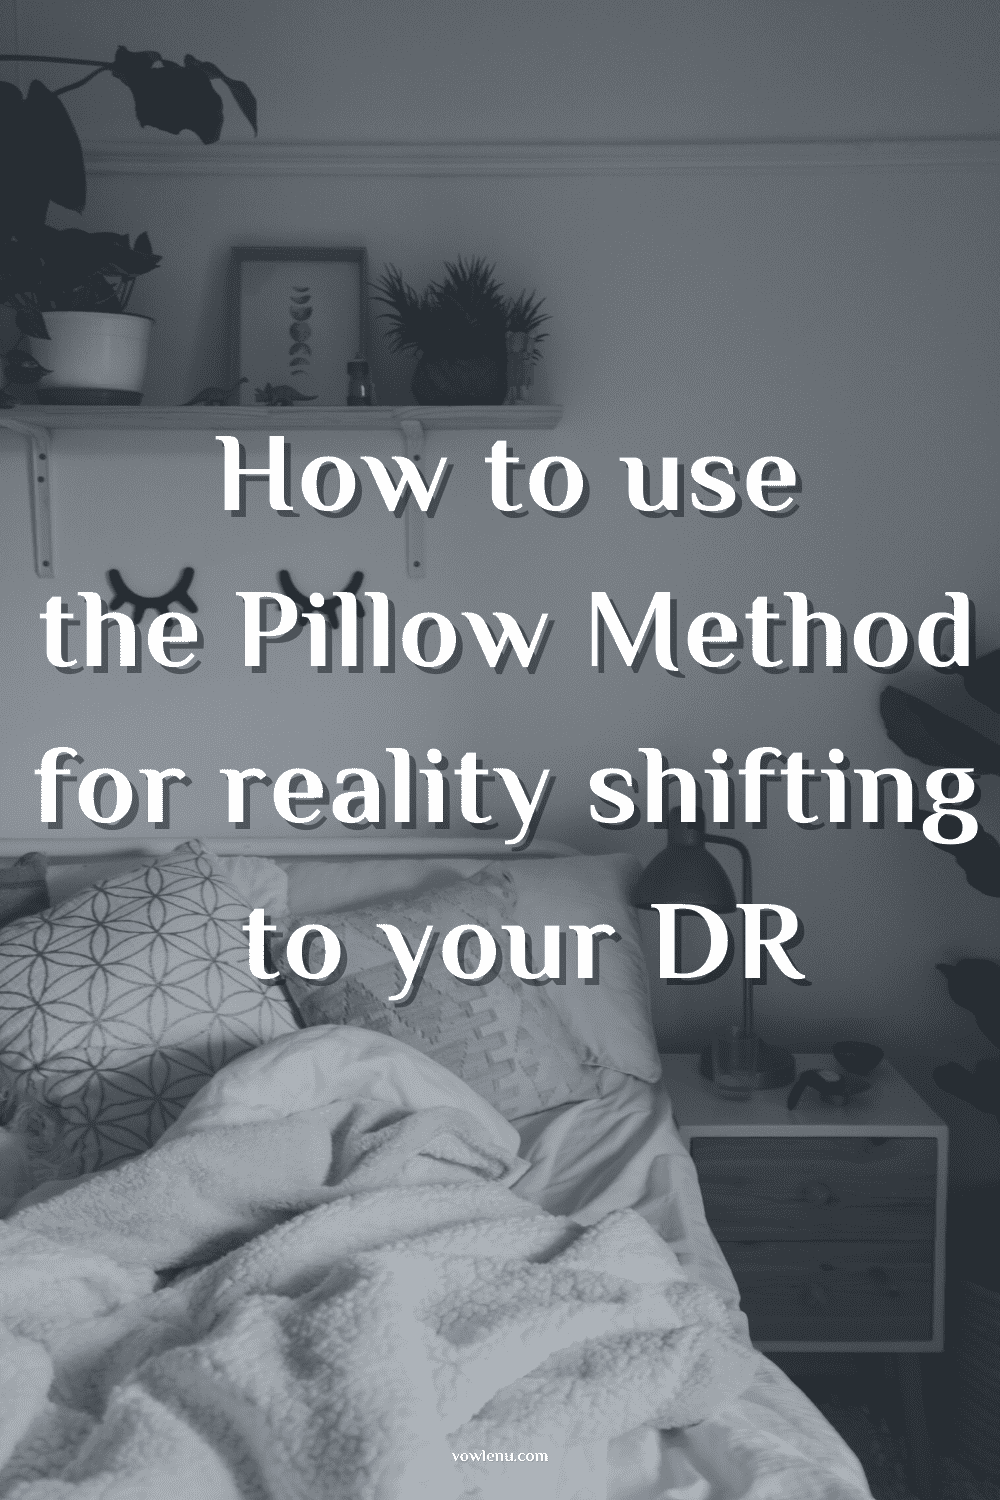 How to use the Pillow Method for reality shifting to your DR